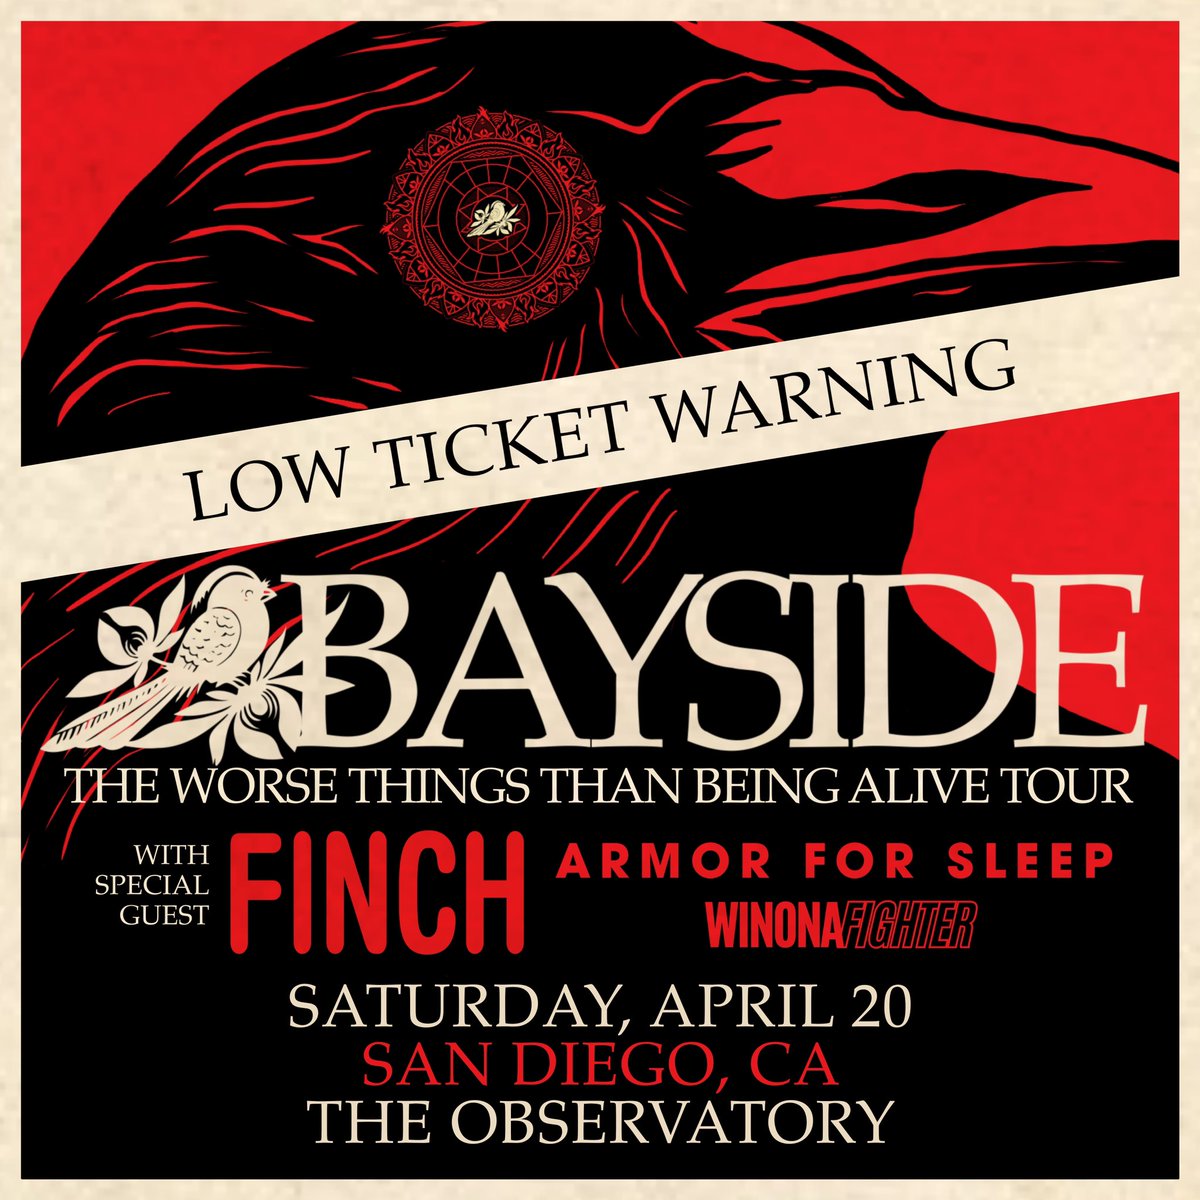 Low Ticket Warning for our Saturday, April 20th show at @ObservatorySD in San Diego with Finch, @ArmorForSleepNJ, and @winonafighter! 🚨 Tickets available at baysidebayside.com!